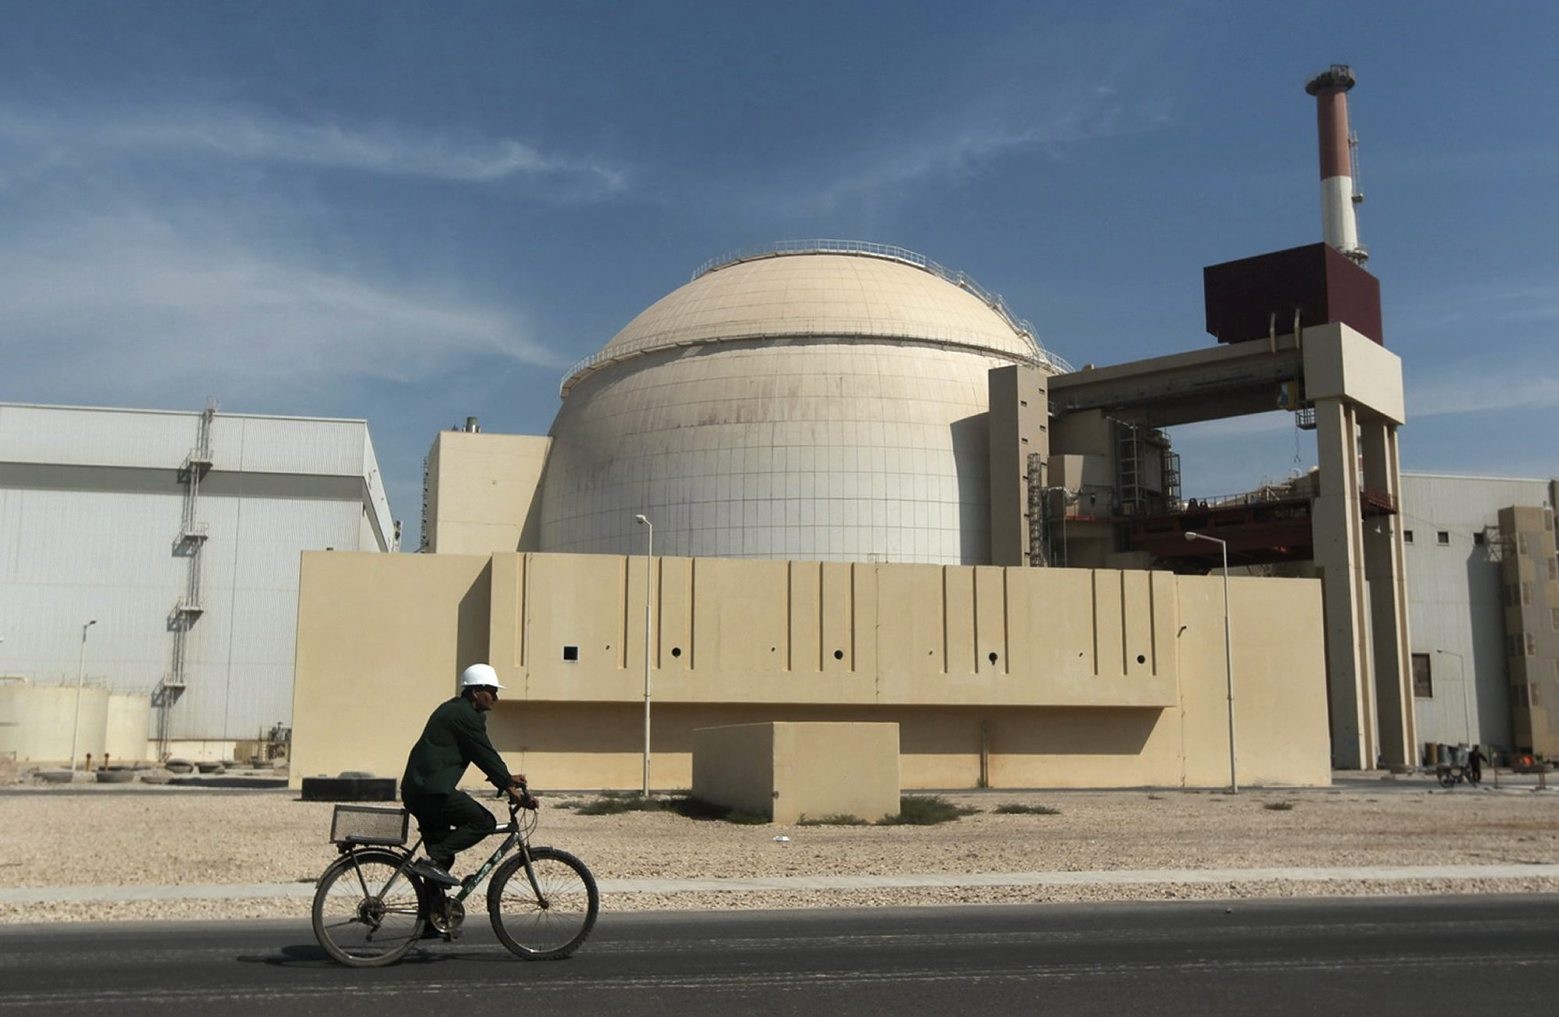 ZUM JAHRESTAG DES ATOMABKOMMENS MIT DEM IRAN, STELLEN WIR IHNEN AM MONTAG 11. JULI 2016 FOLGENDES ARCHIVBILD ZUR VERFUEGUNG. - In this Oct. 26, 2010 file photo, a worker rides a bicycle in front of the reactor building of the Bushehr nuclear power plant, just outside the southern city of Bushehr, Iran. Assassinations, cyber-attacks and possible military strikes: As nuclear negotiations with Iran enter a crucial stage, Tehran is voicing fears that tougher oversight of its activities will increase the risks of an attack on its atomic facilities and the scientists working on them. (AP Photo/Mehr News Agency, Majid Asgaripour, File) IRAN ATOMABKOMMEN JAHRESTAG